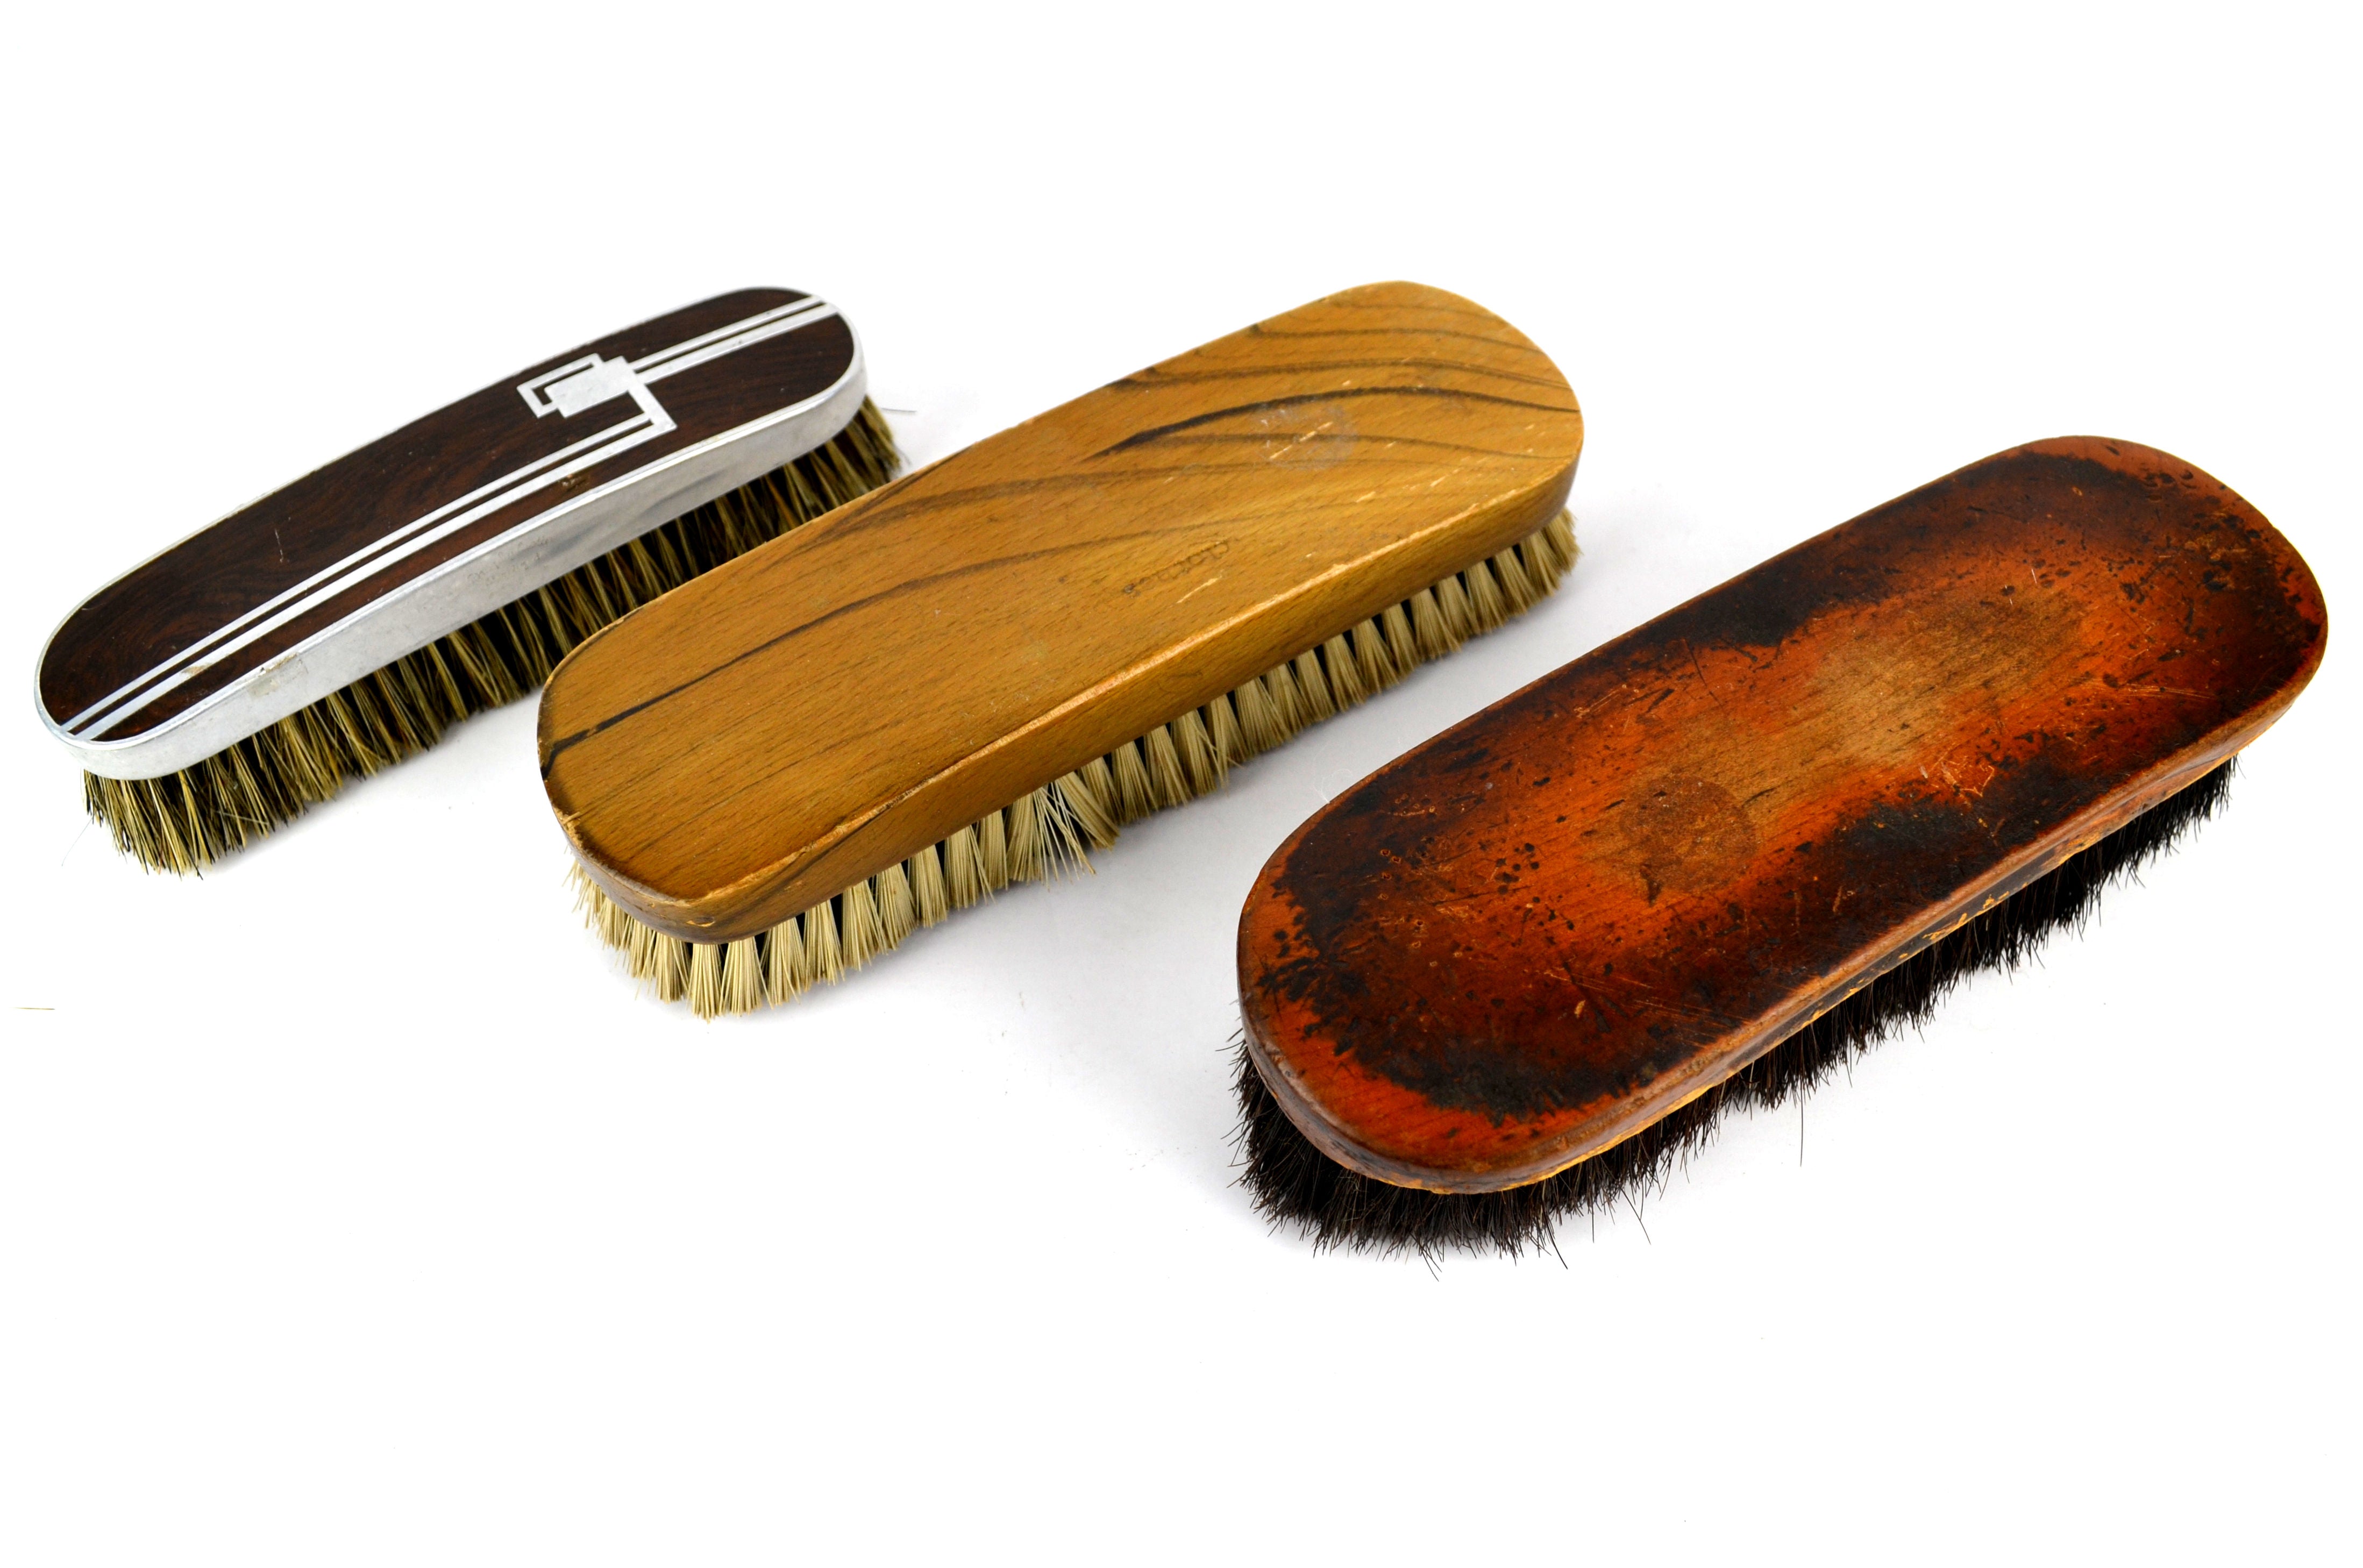 Clothing brushes & care — The Shoe Care Shop